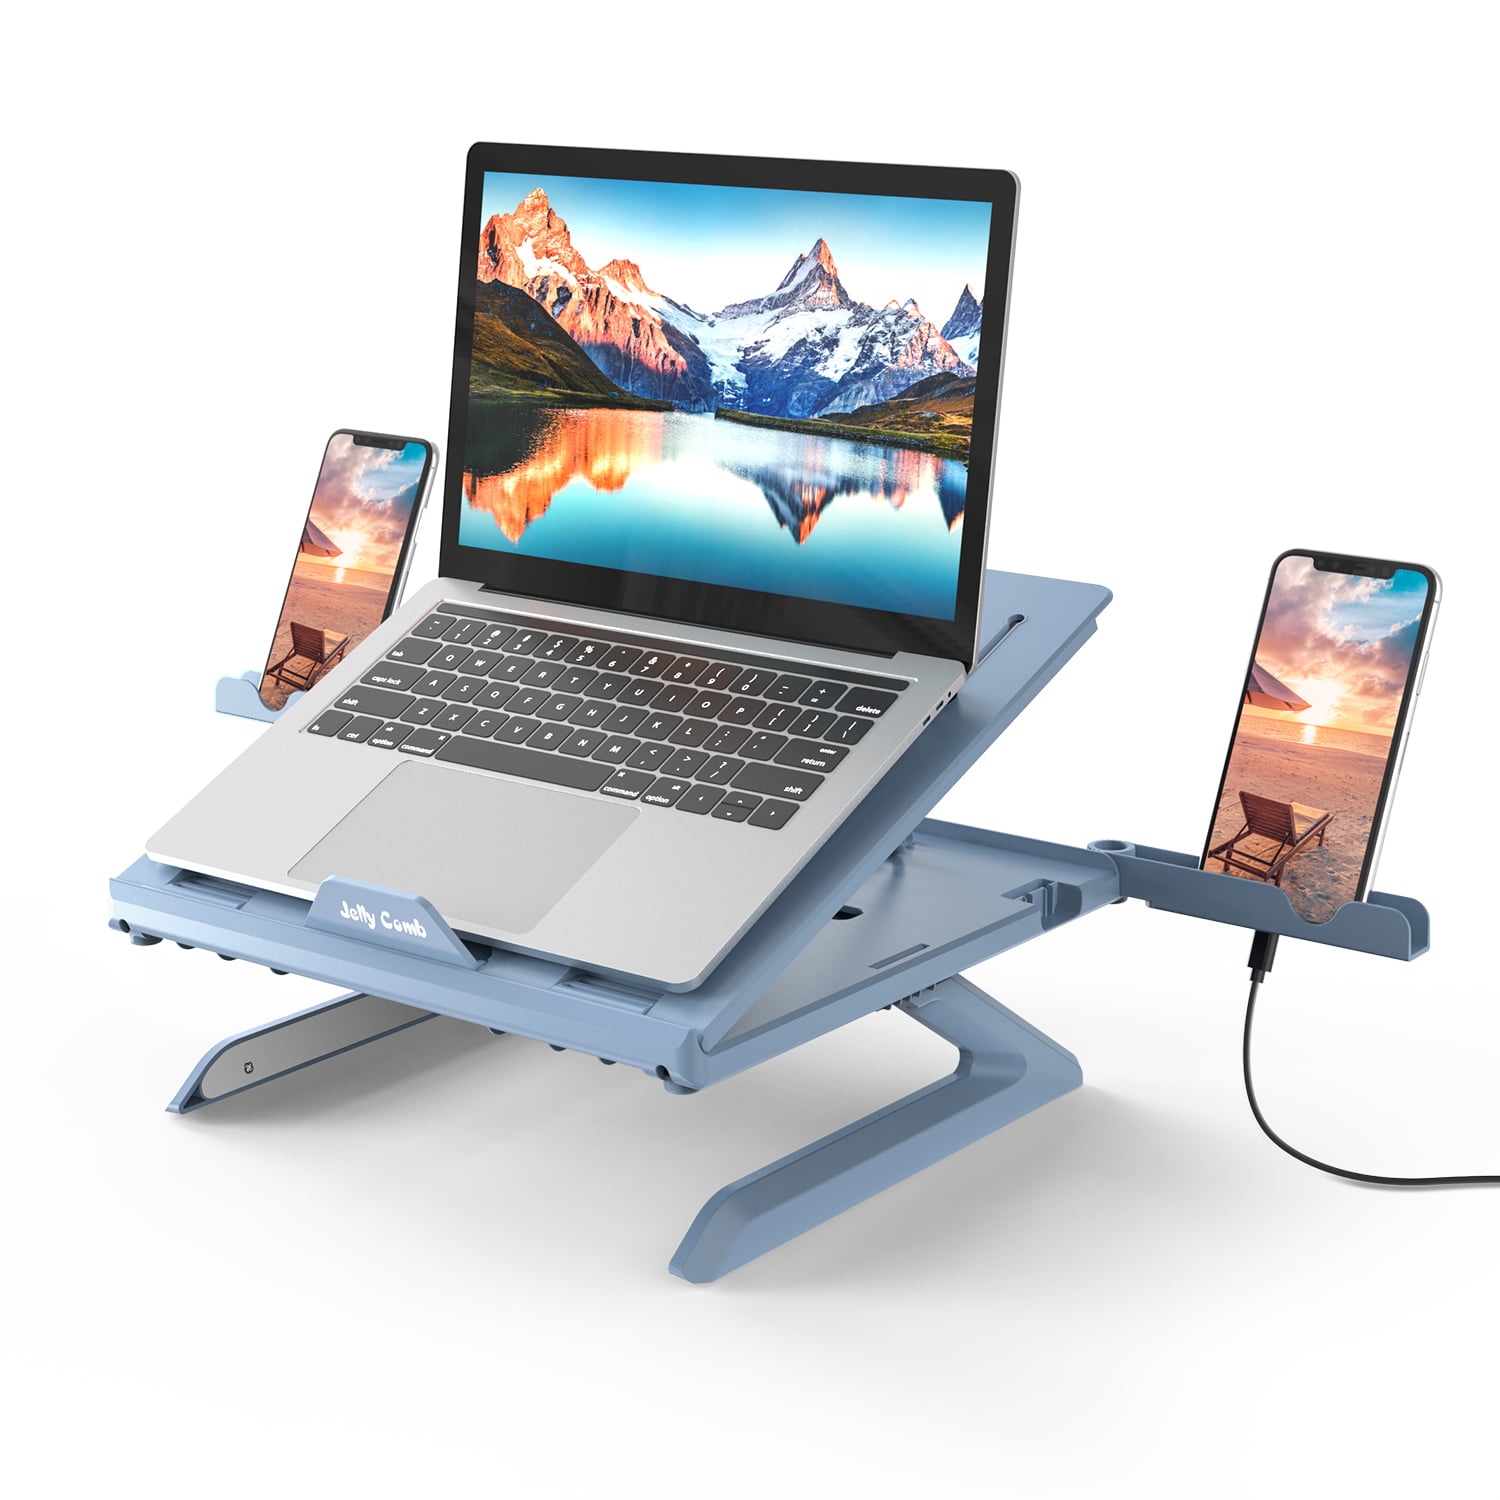 Adjustable Laptop Stand for Desk Portable Foldable Compact Universal Computer Stand Laptop Stand for 12 13 15 17 inch Aluminum Cooling Stand Patented X-Stand MacBook Pro Stand